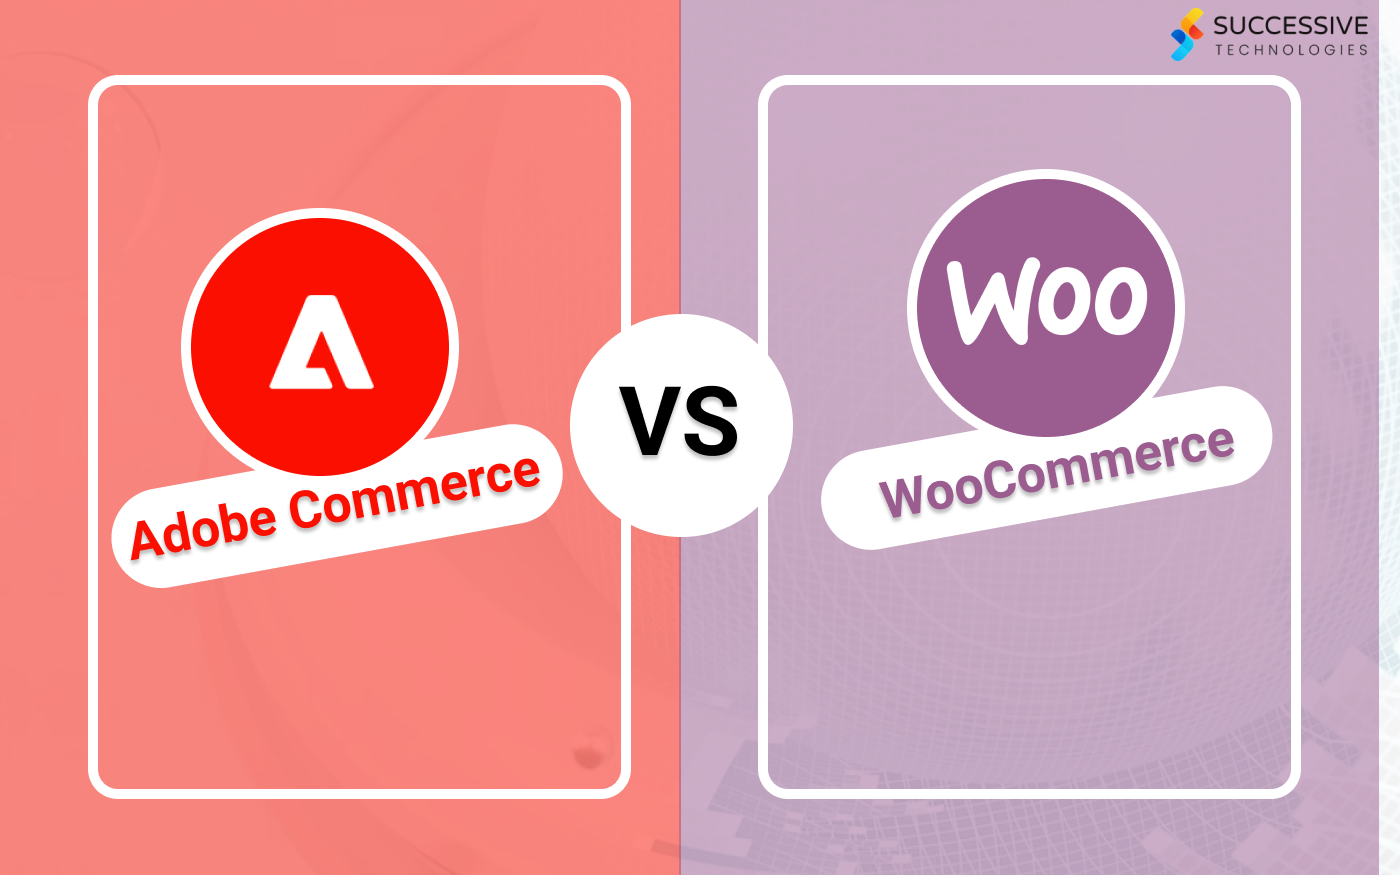 Adobe Commerce (Magento) vs WooCommerce: Which One to Choose?